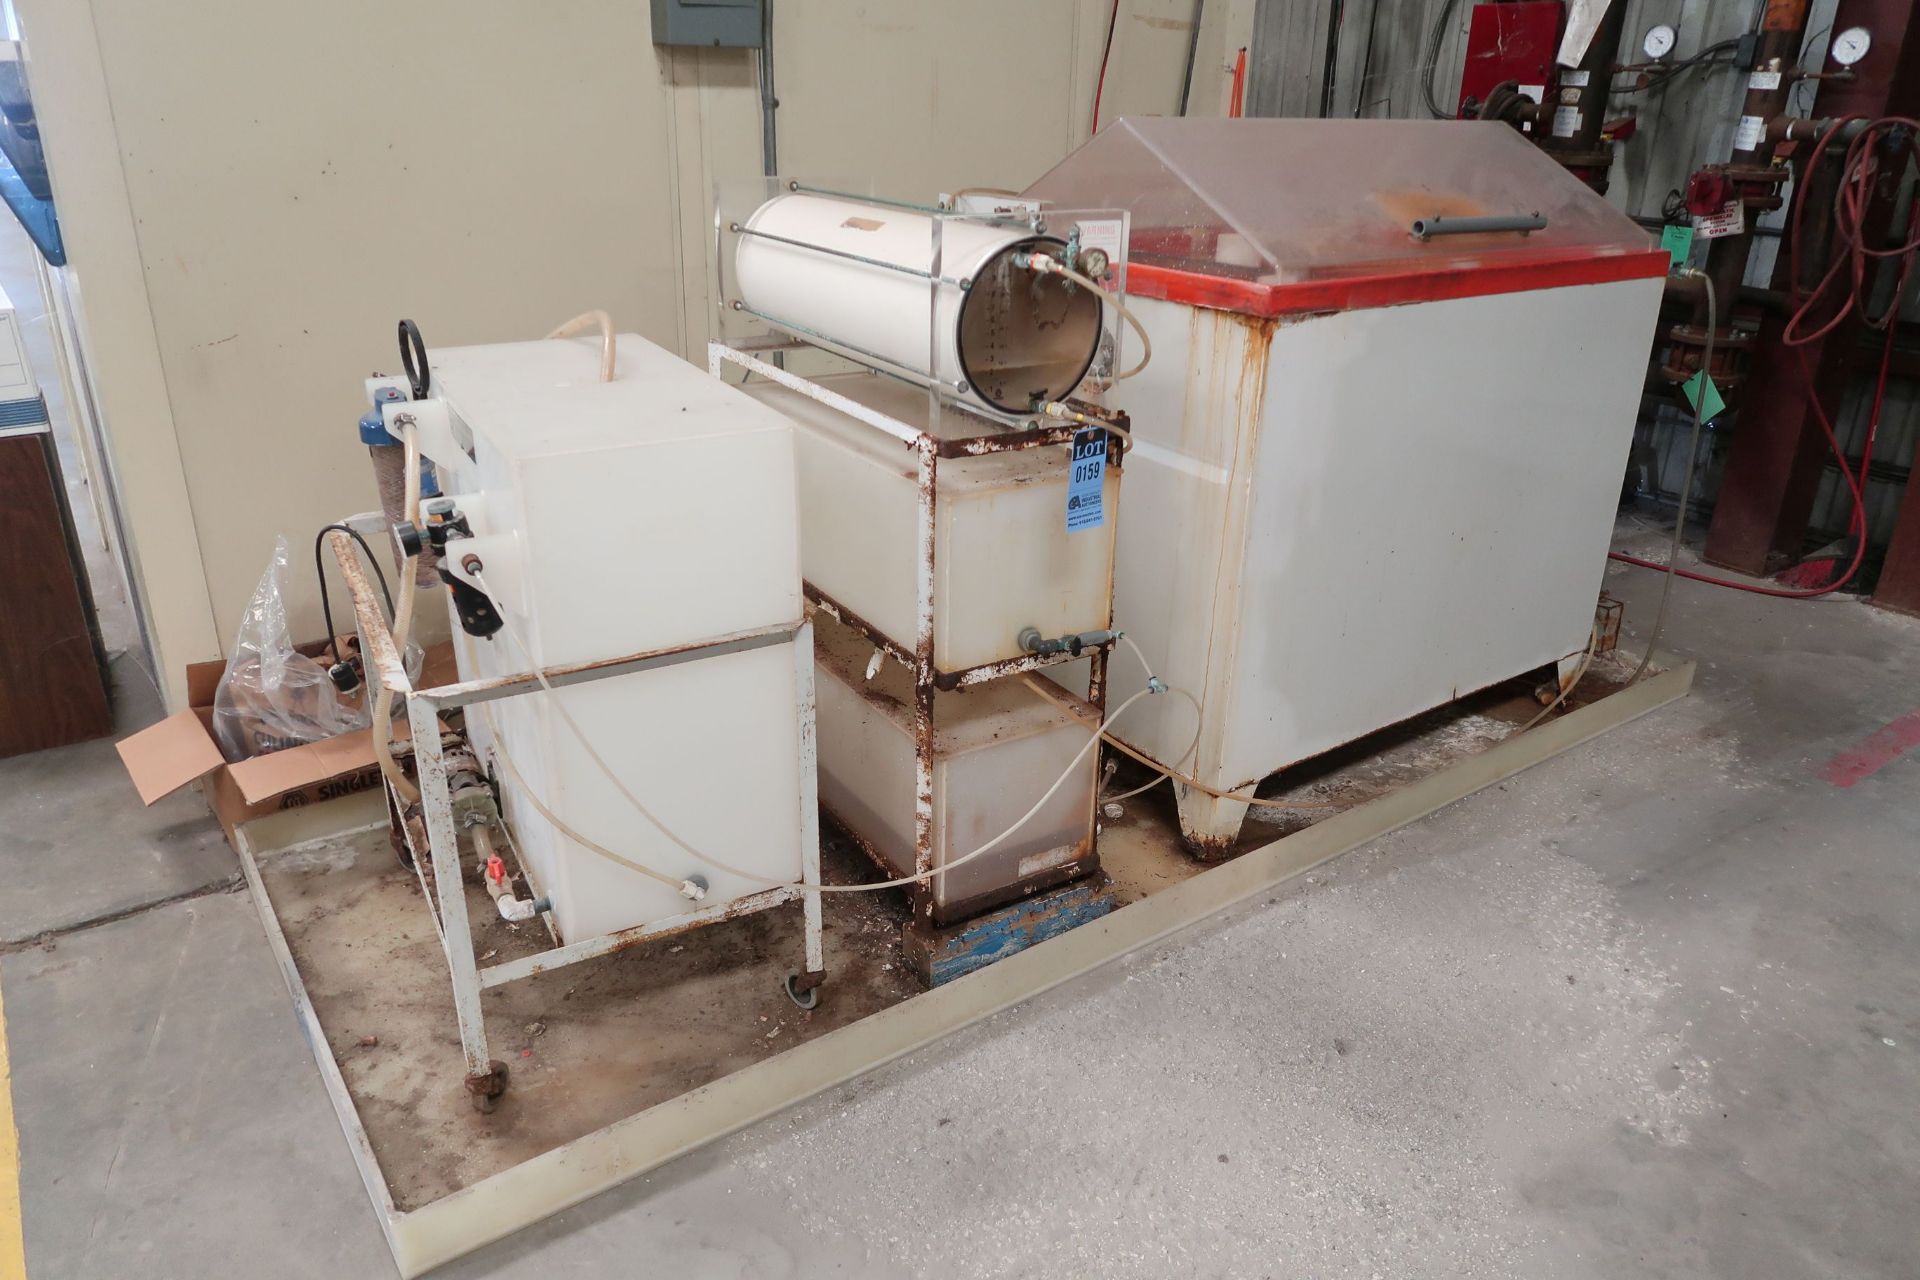 36" X 54" SINGLETON MODEL SCCH22 SALT SPRAY TEST SYSTEM WITH FILTERS AND TANKS; S/N 29596